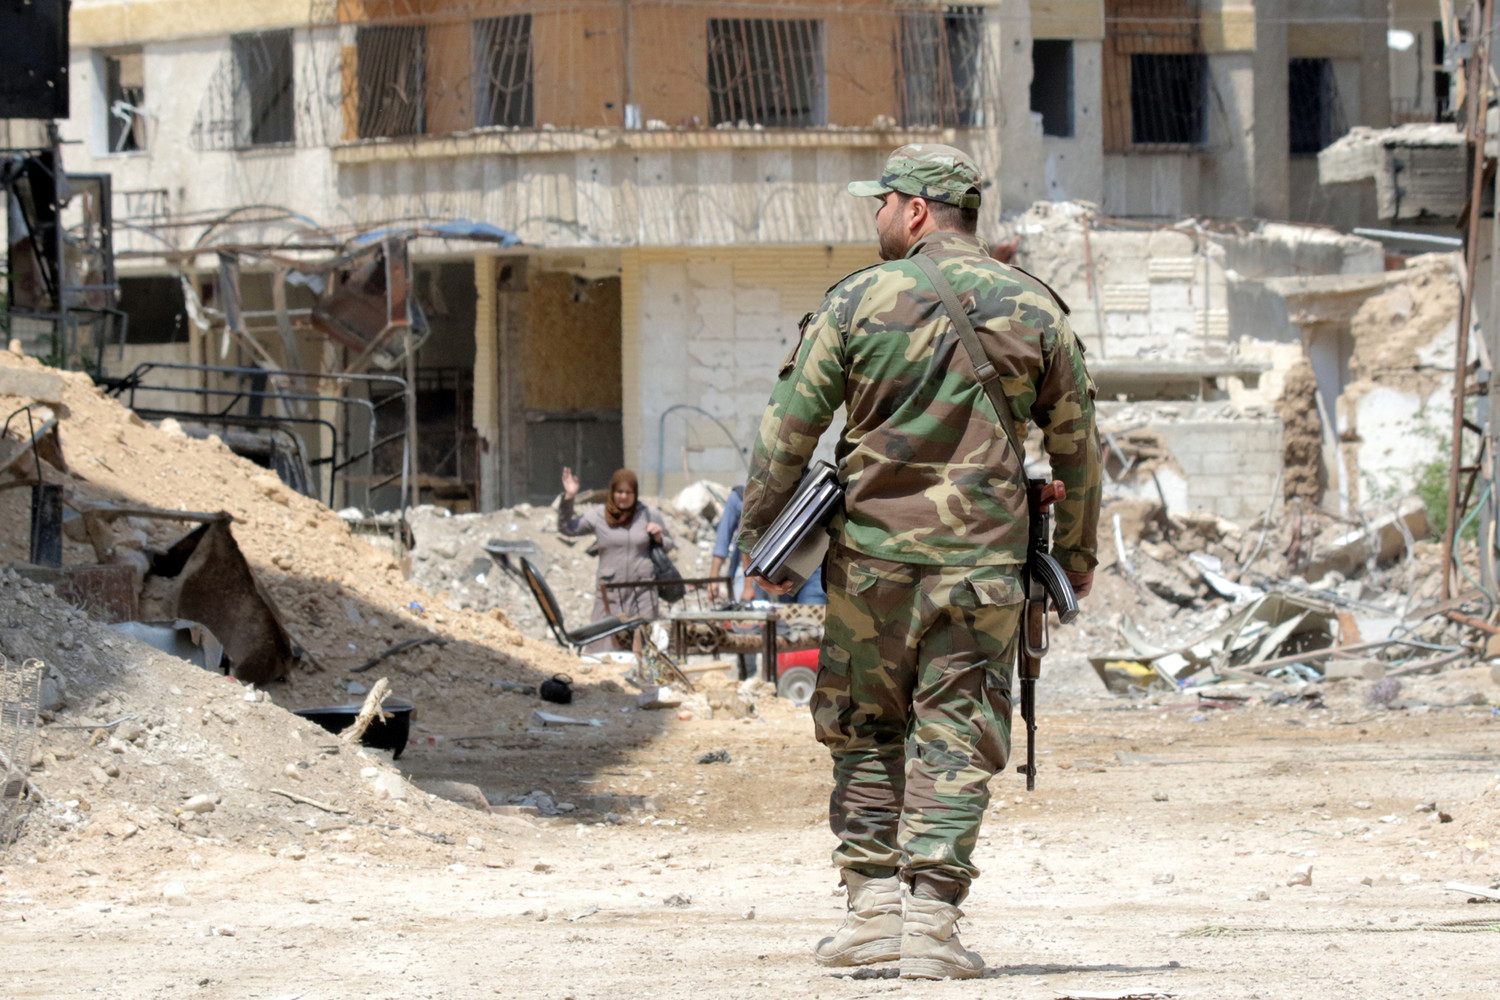 A Syrian soldier walks amid destroyed buildings April 11 in the war-torn town of Ghouta. Lebanese Cardinal Bechara Rai appealed to world leaders to stop the war in Syria and to work for comprehensive peace through diplomatic means.